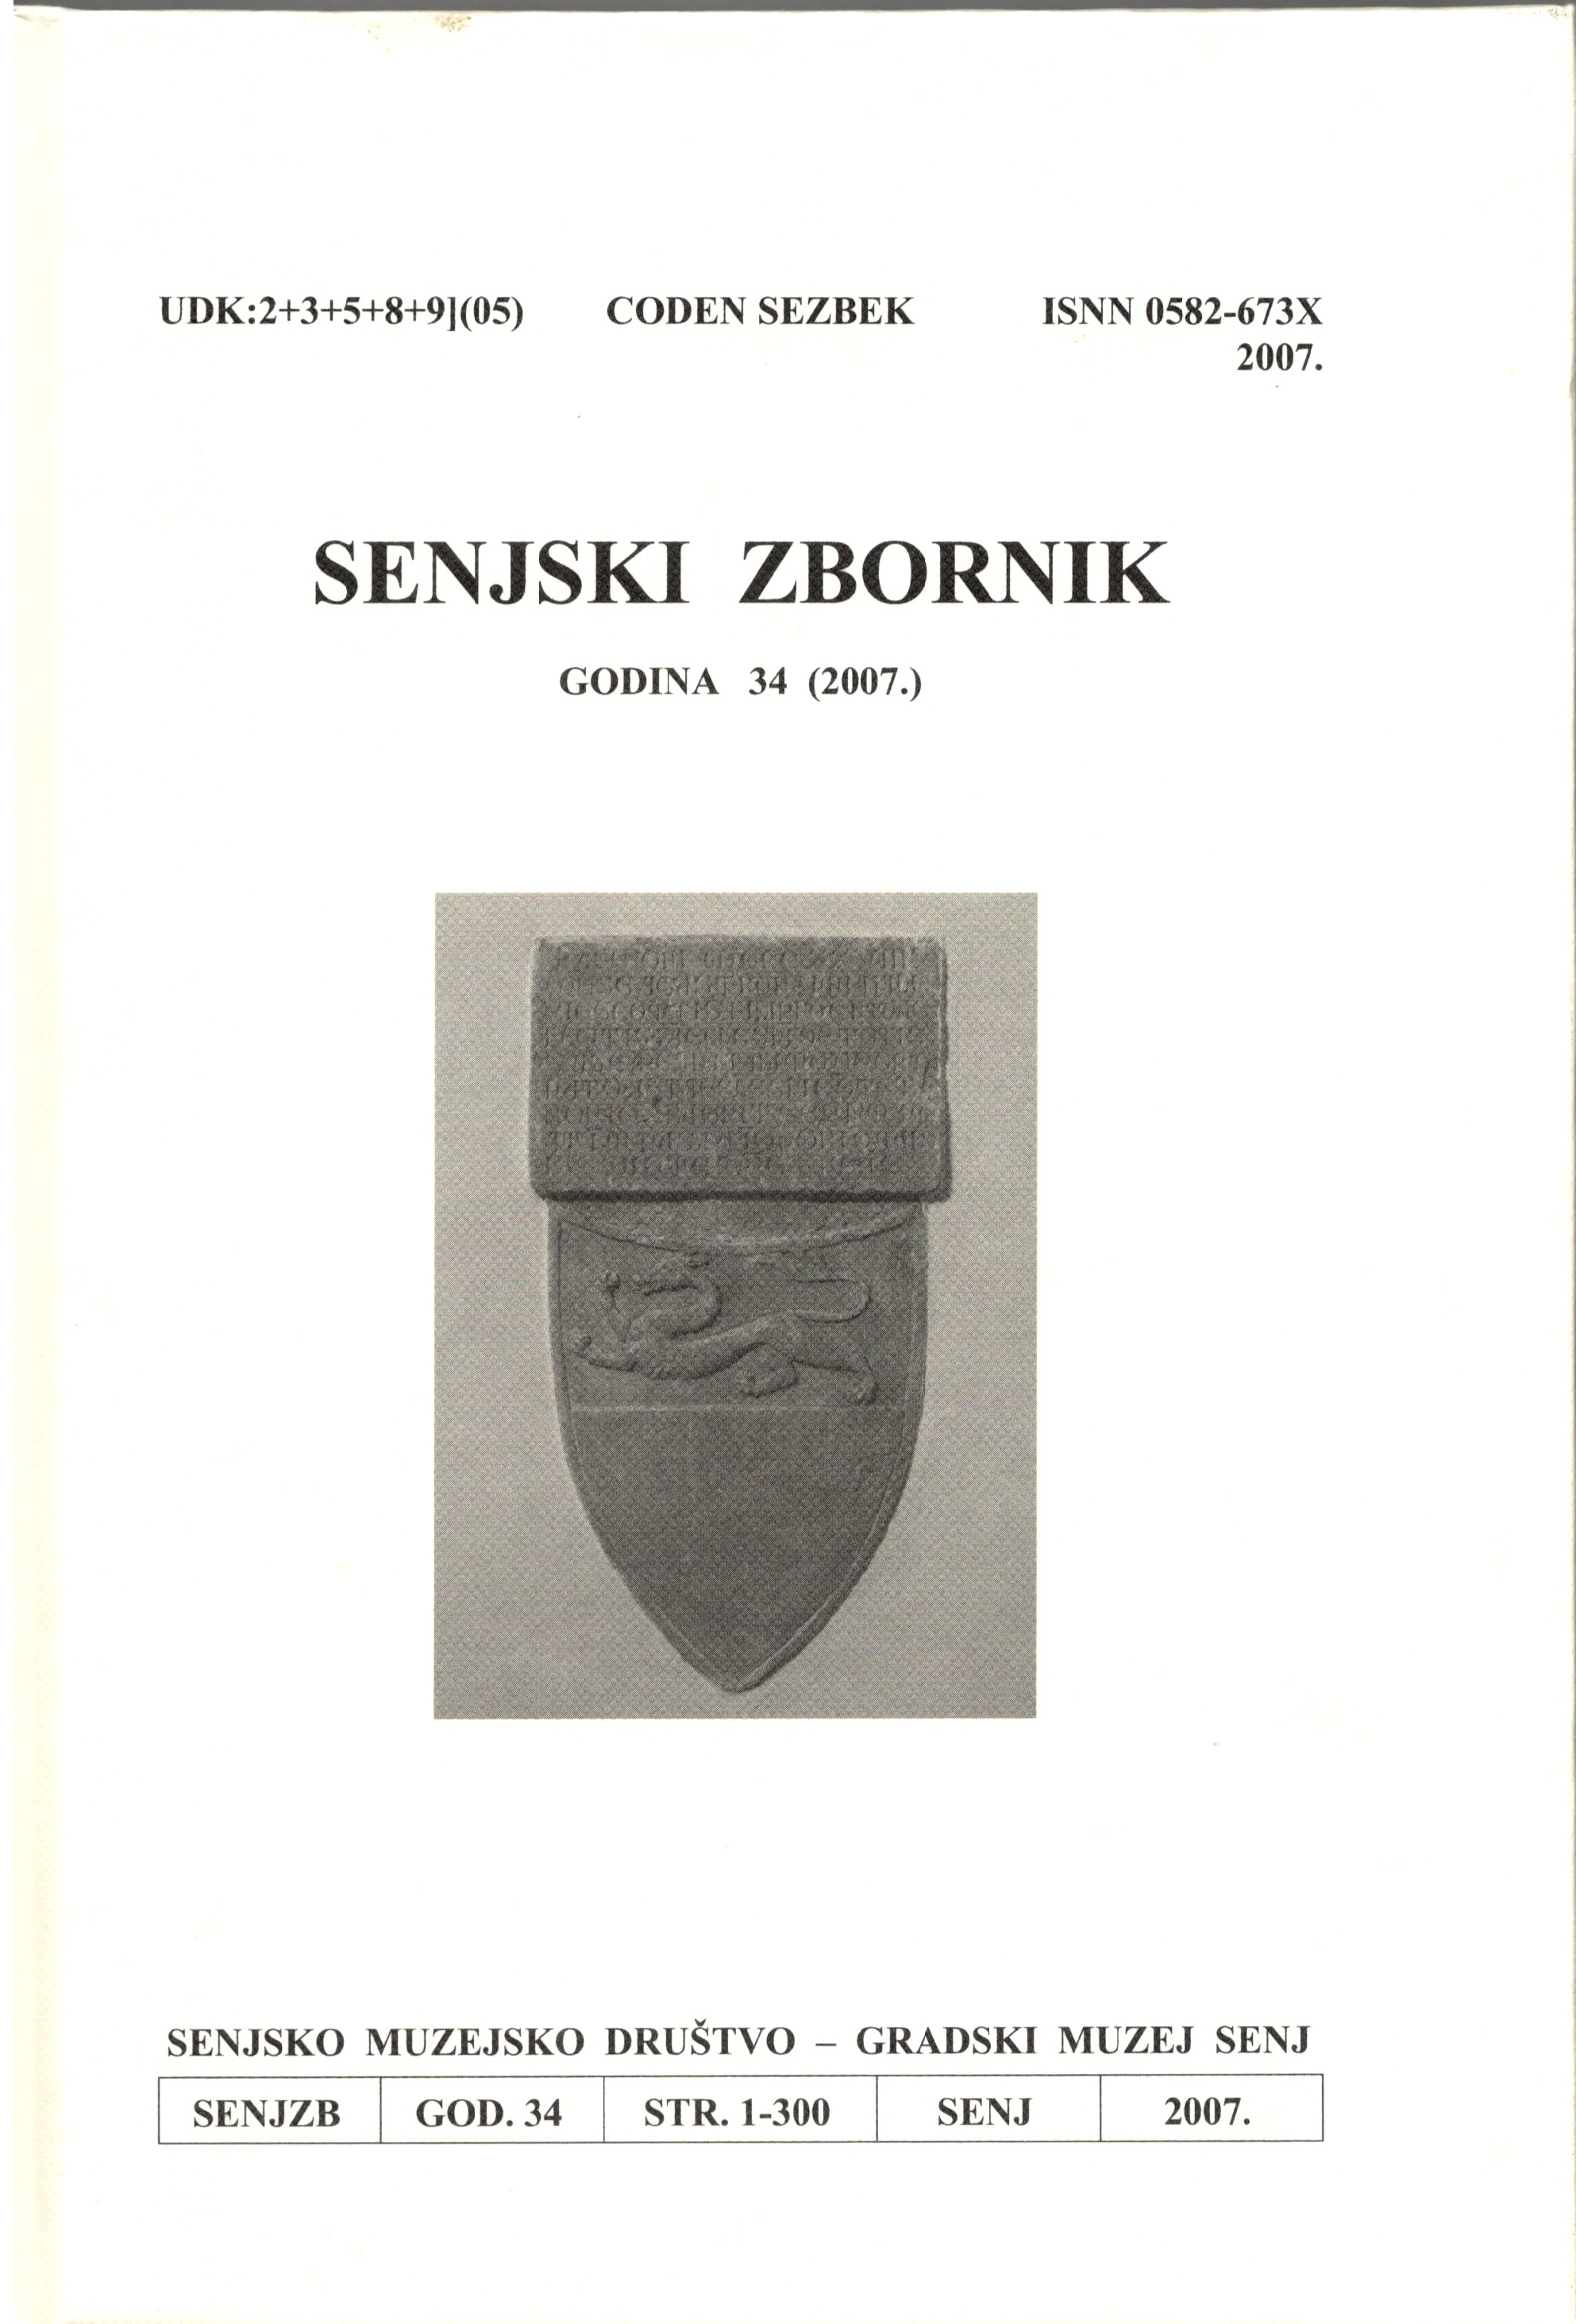 The penal law of the Statute of Senj from 1388 Cover Image